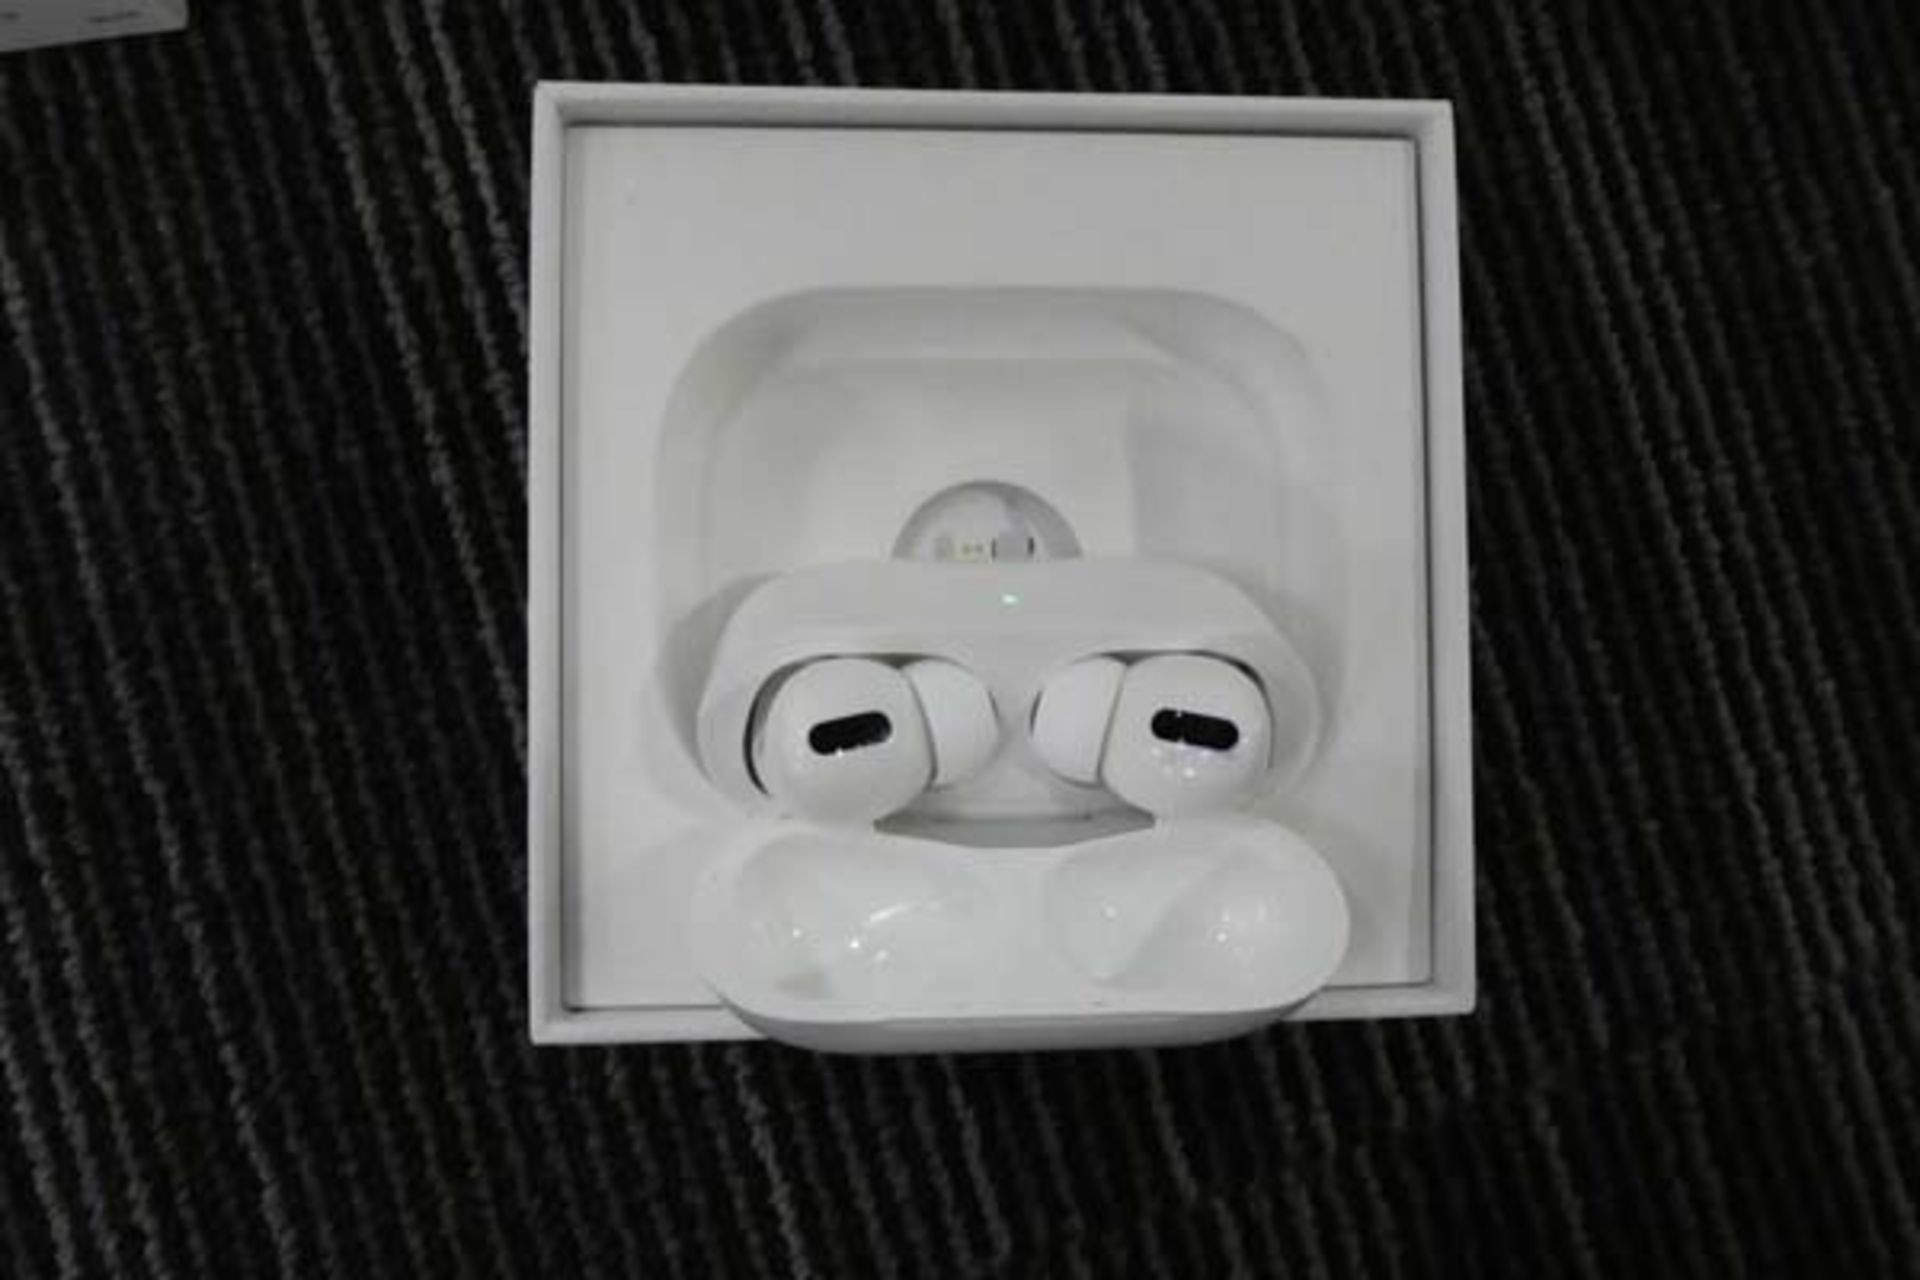 Boxed set of Apple Airpods Pro, with wireless charging case, charging cable and spare air tips